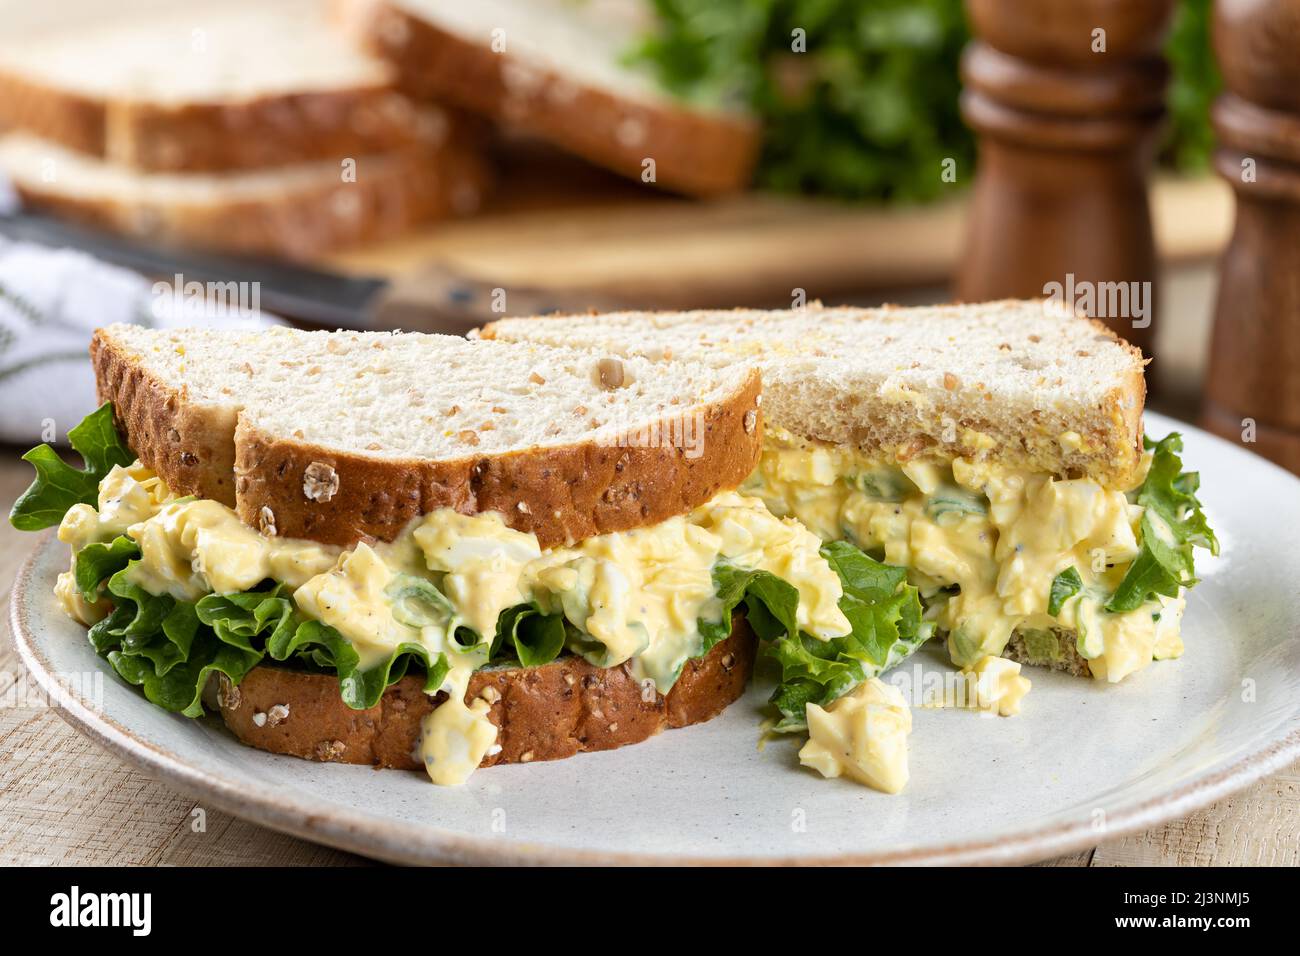 Egg salad and lettuce sandwich on whole grain bread on a plate Stock Photo